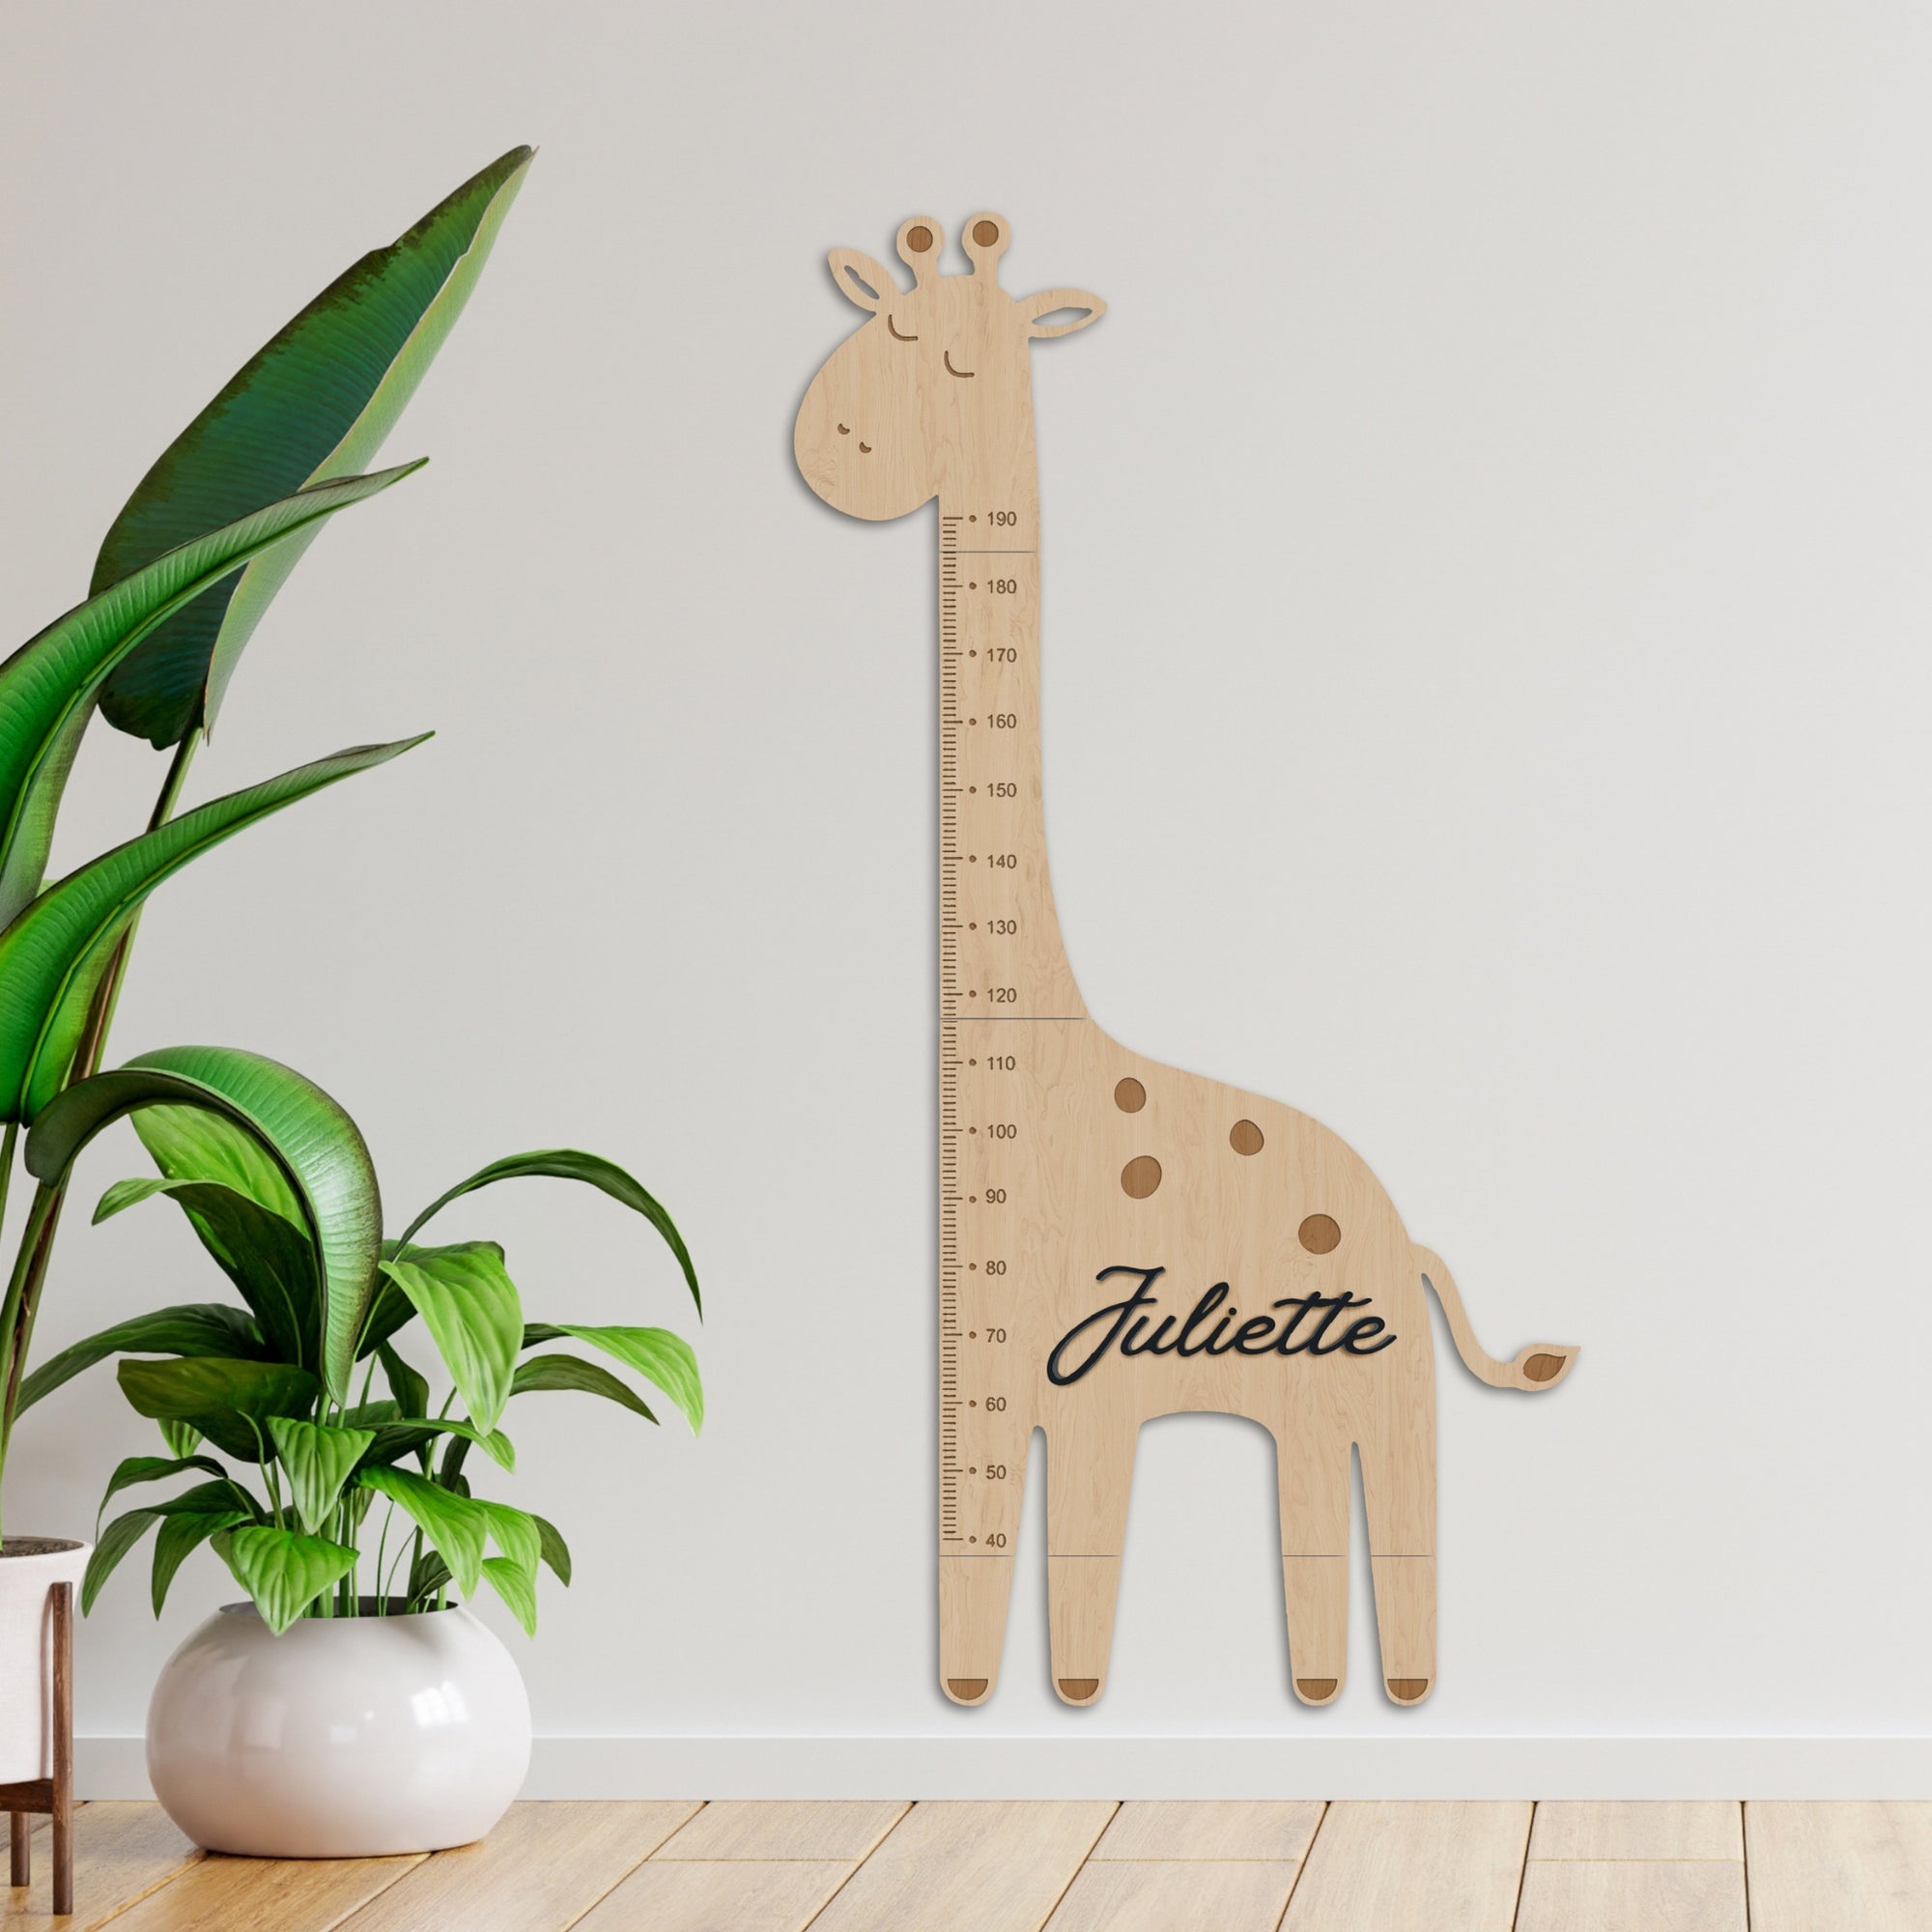 Custom 3D Raised Name Wooden Giraffe Height Chart, Personalised Laser Cut &amp; Engraved Family Growth Metric Ruler Record, Nursery Wall Decor